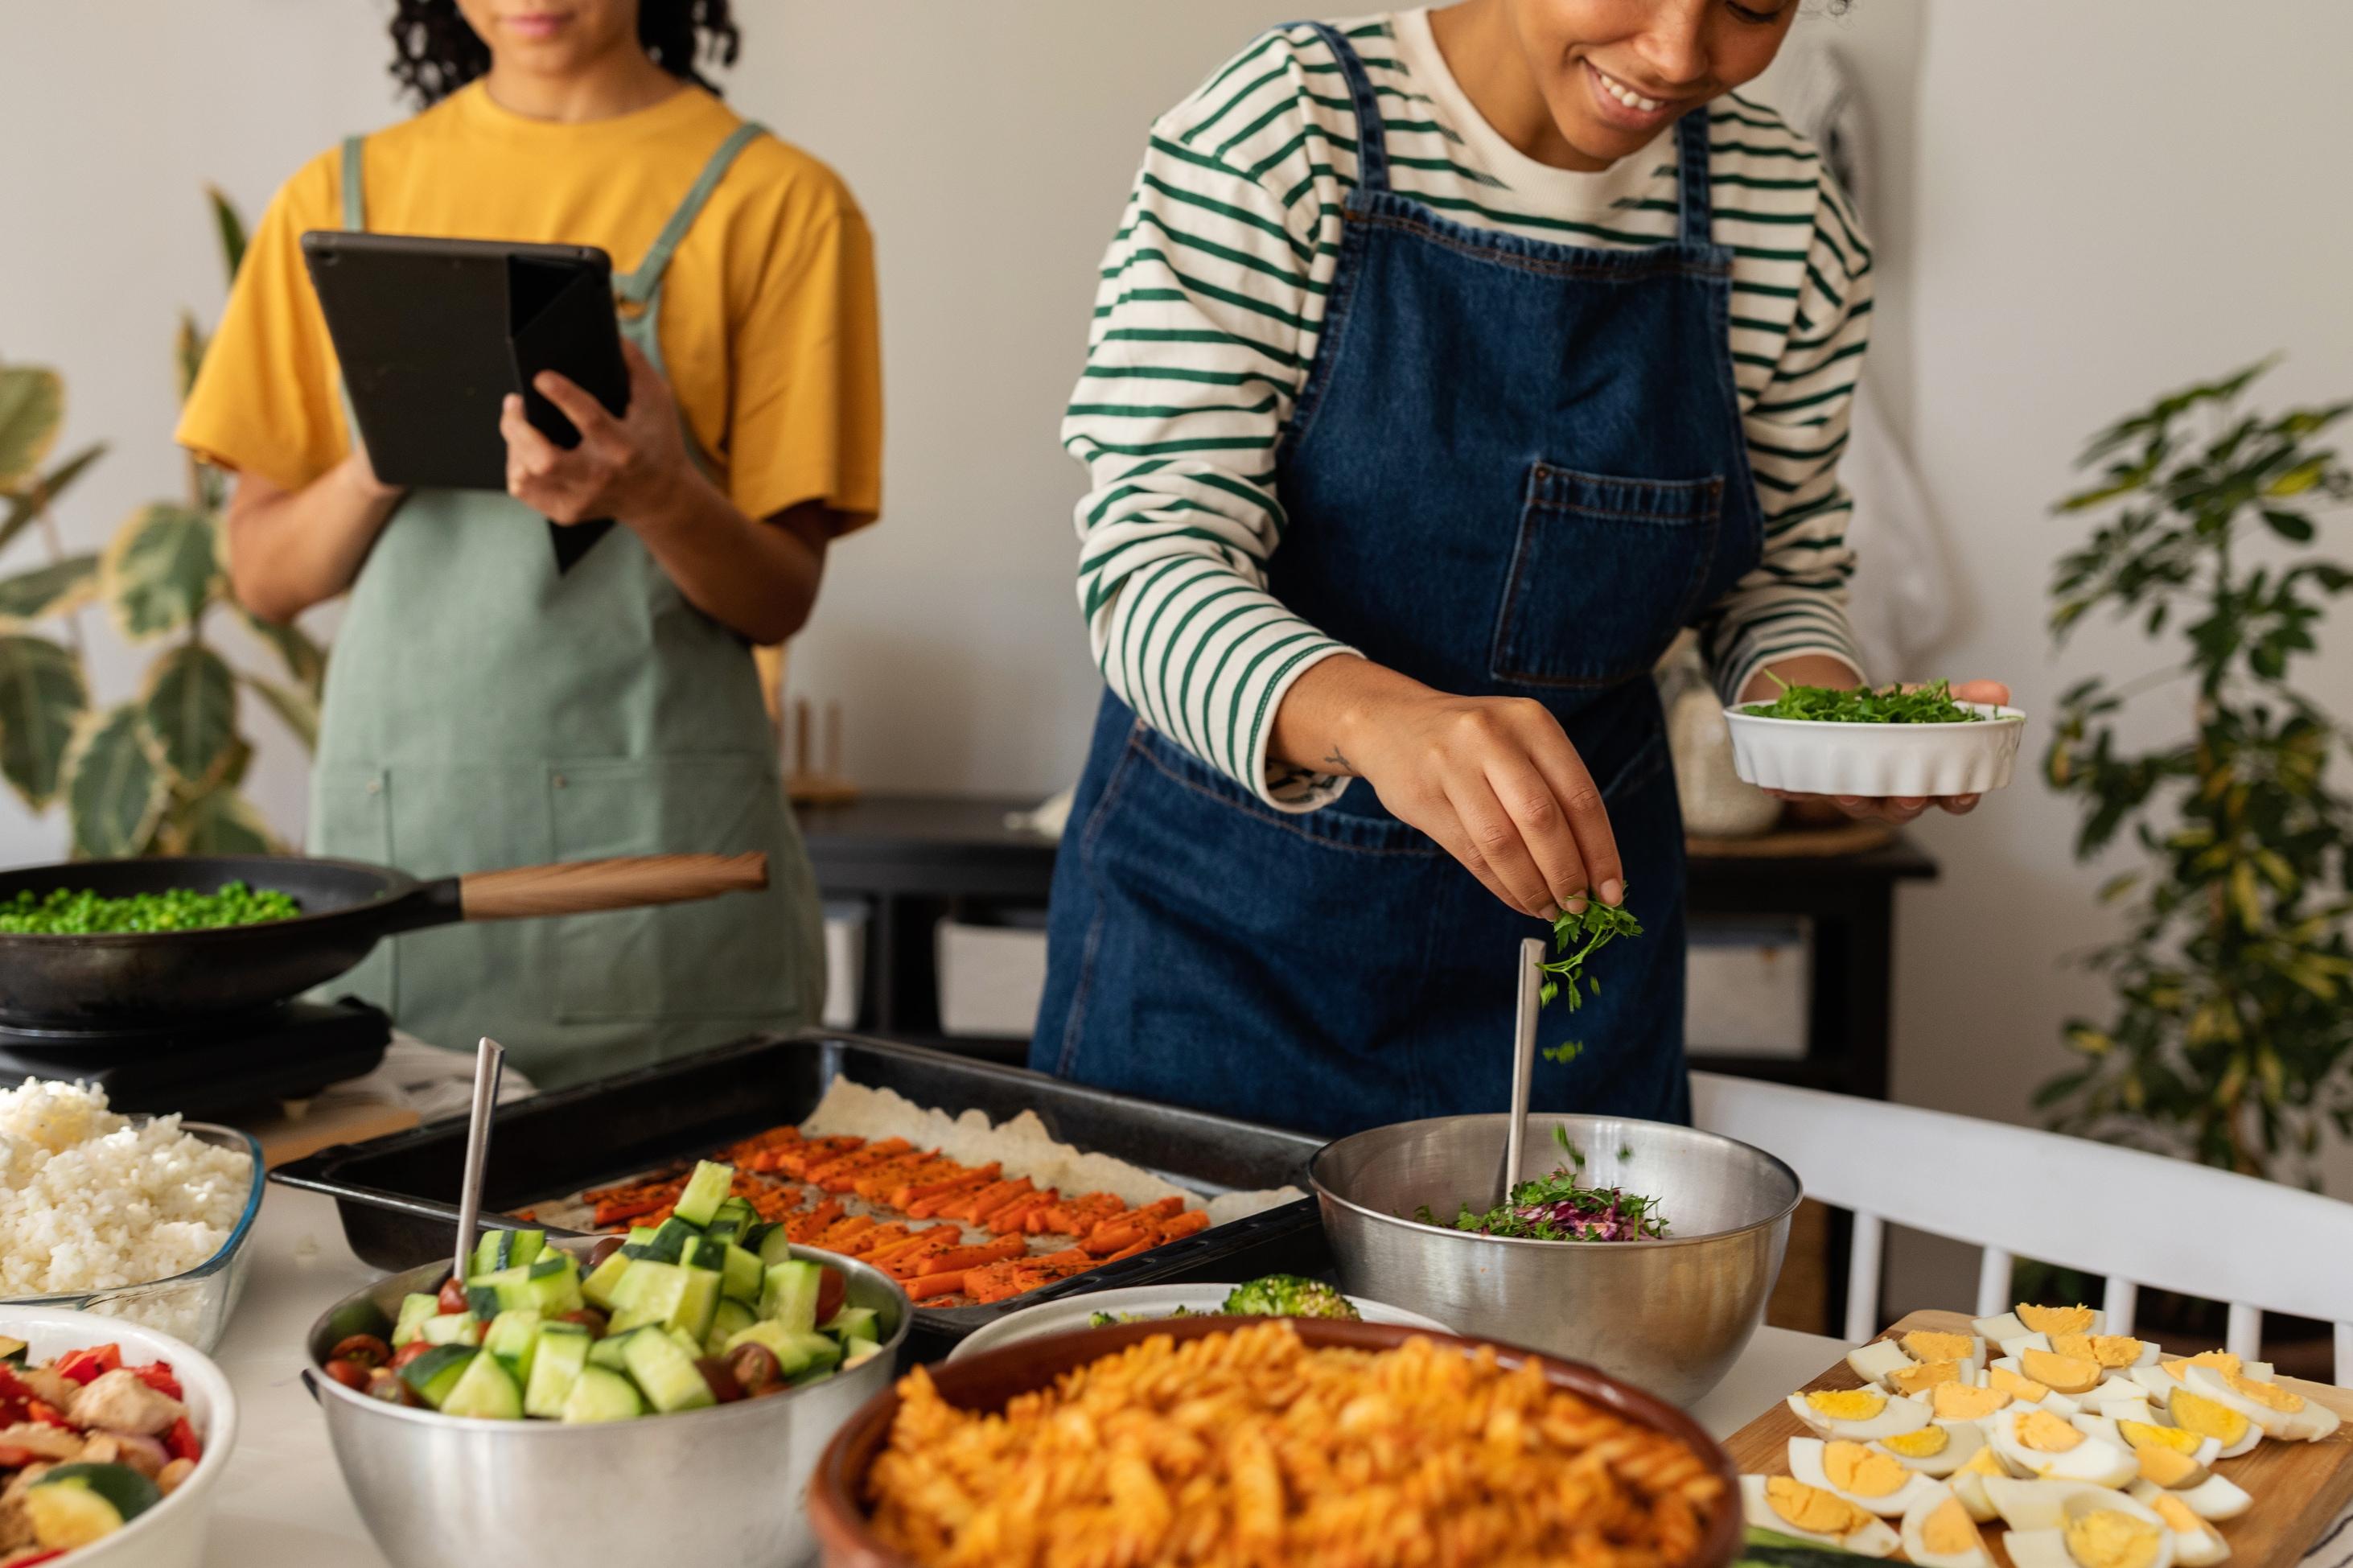 Two women, one holding a tablet, the other holding parsley, smile while cooking at a kitchen counter filled with salad, roasted red peppers, sautéed vegetables and eggs.